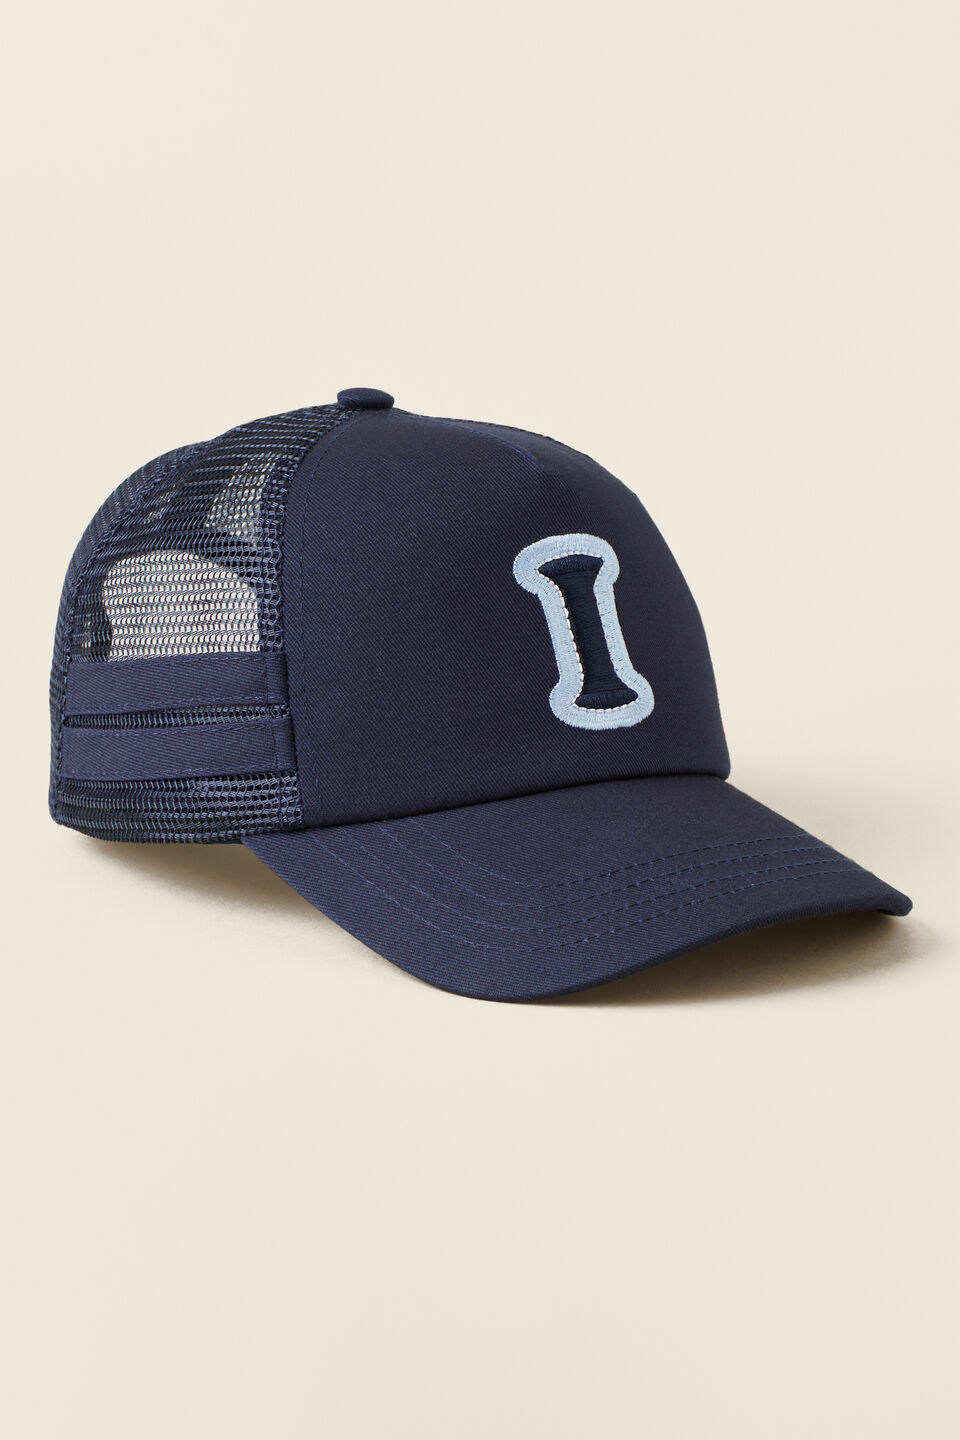 Embroidered Initial Cap  I